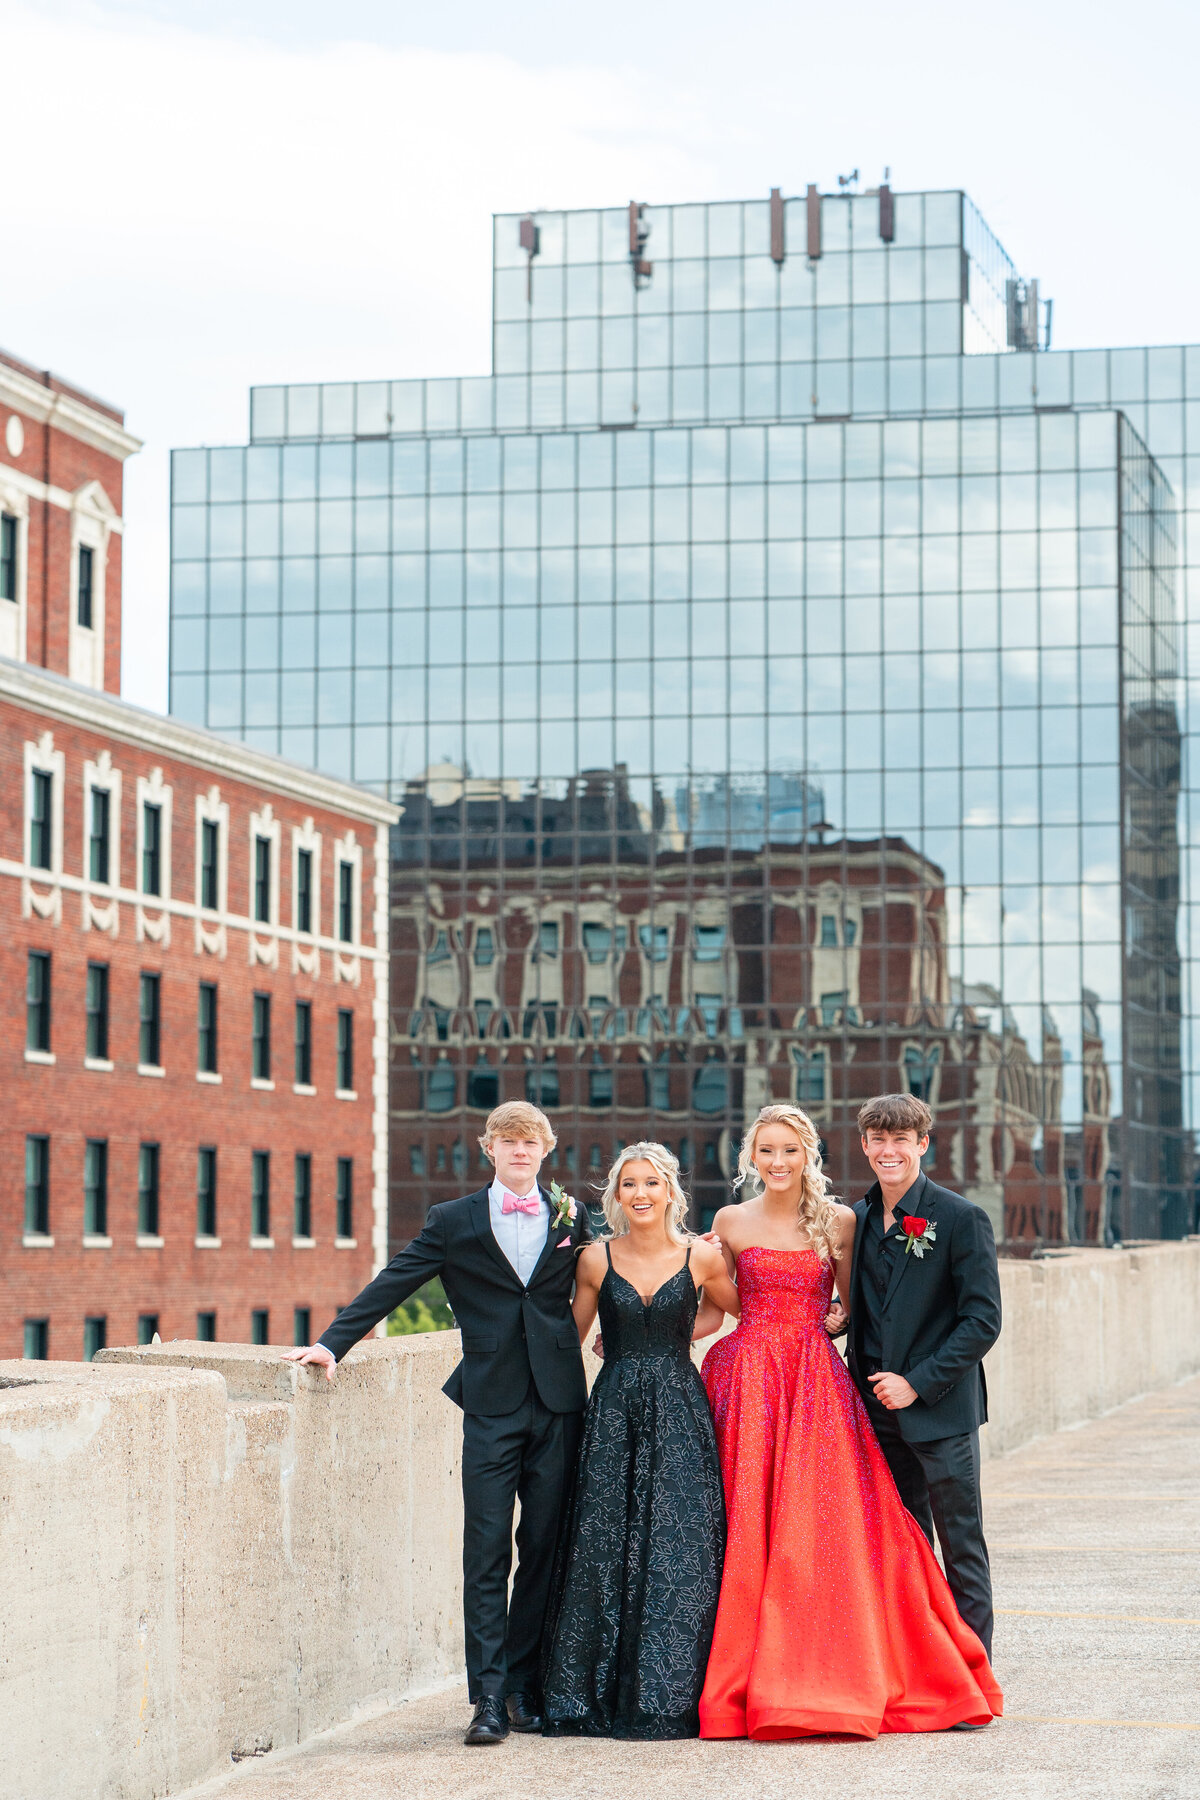 Chattanooga Prom Photos at West Village Chattanooga, TN photo shoot location.  Kelley is a Chattanooga photographer.